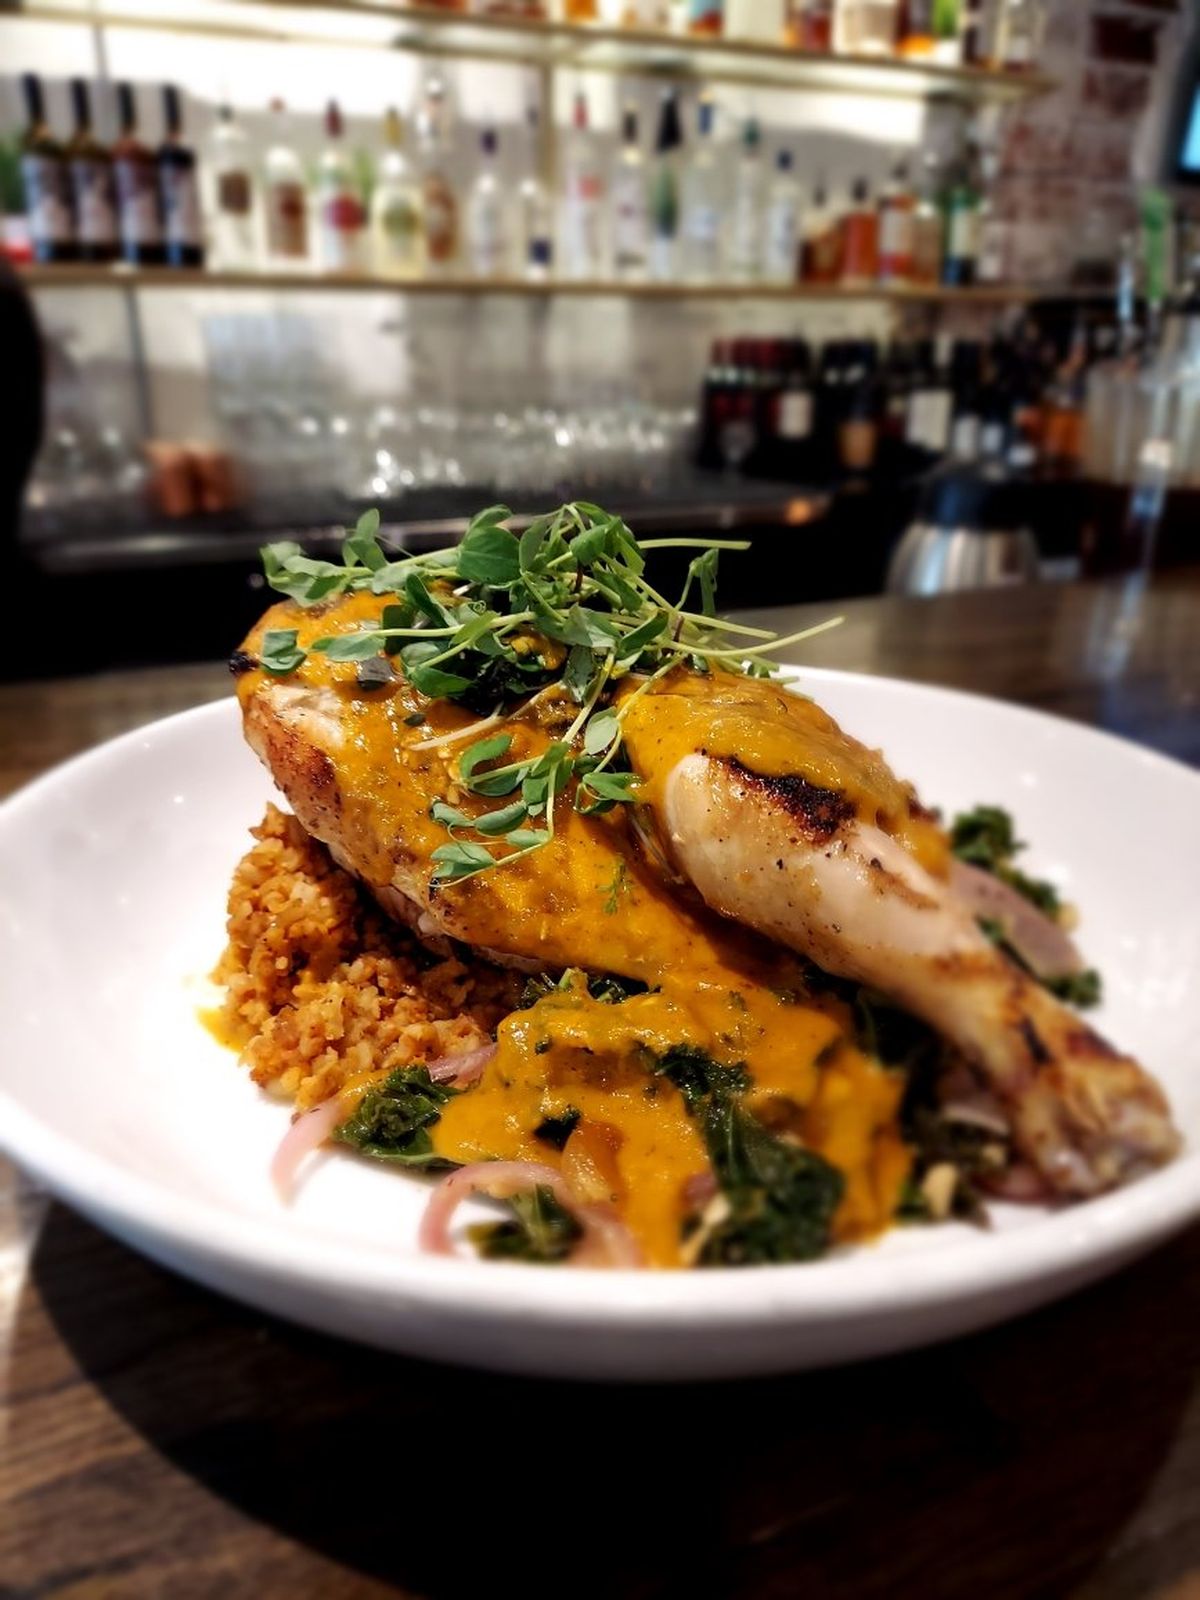 One of the new menu items Jordan Obermeyer has planned for Remedy is brick chicken with salsa espanola, Catalan braised kale, pine nuts and Spanish rice.  (Courtesy of Jordan Obermeyer)